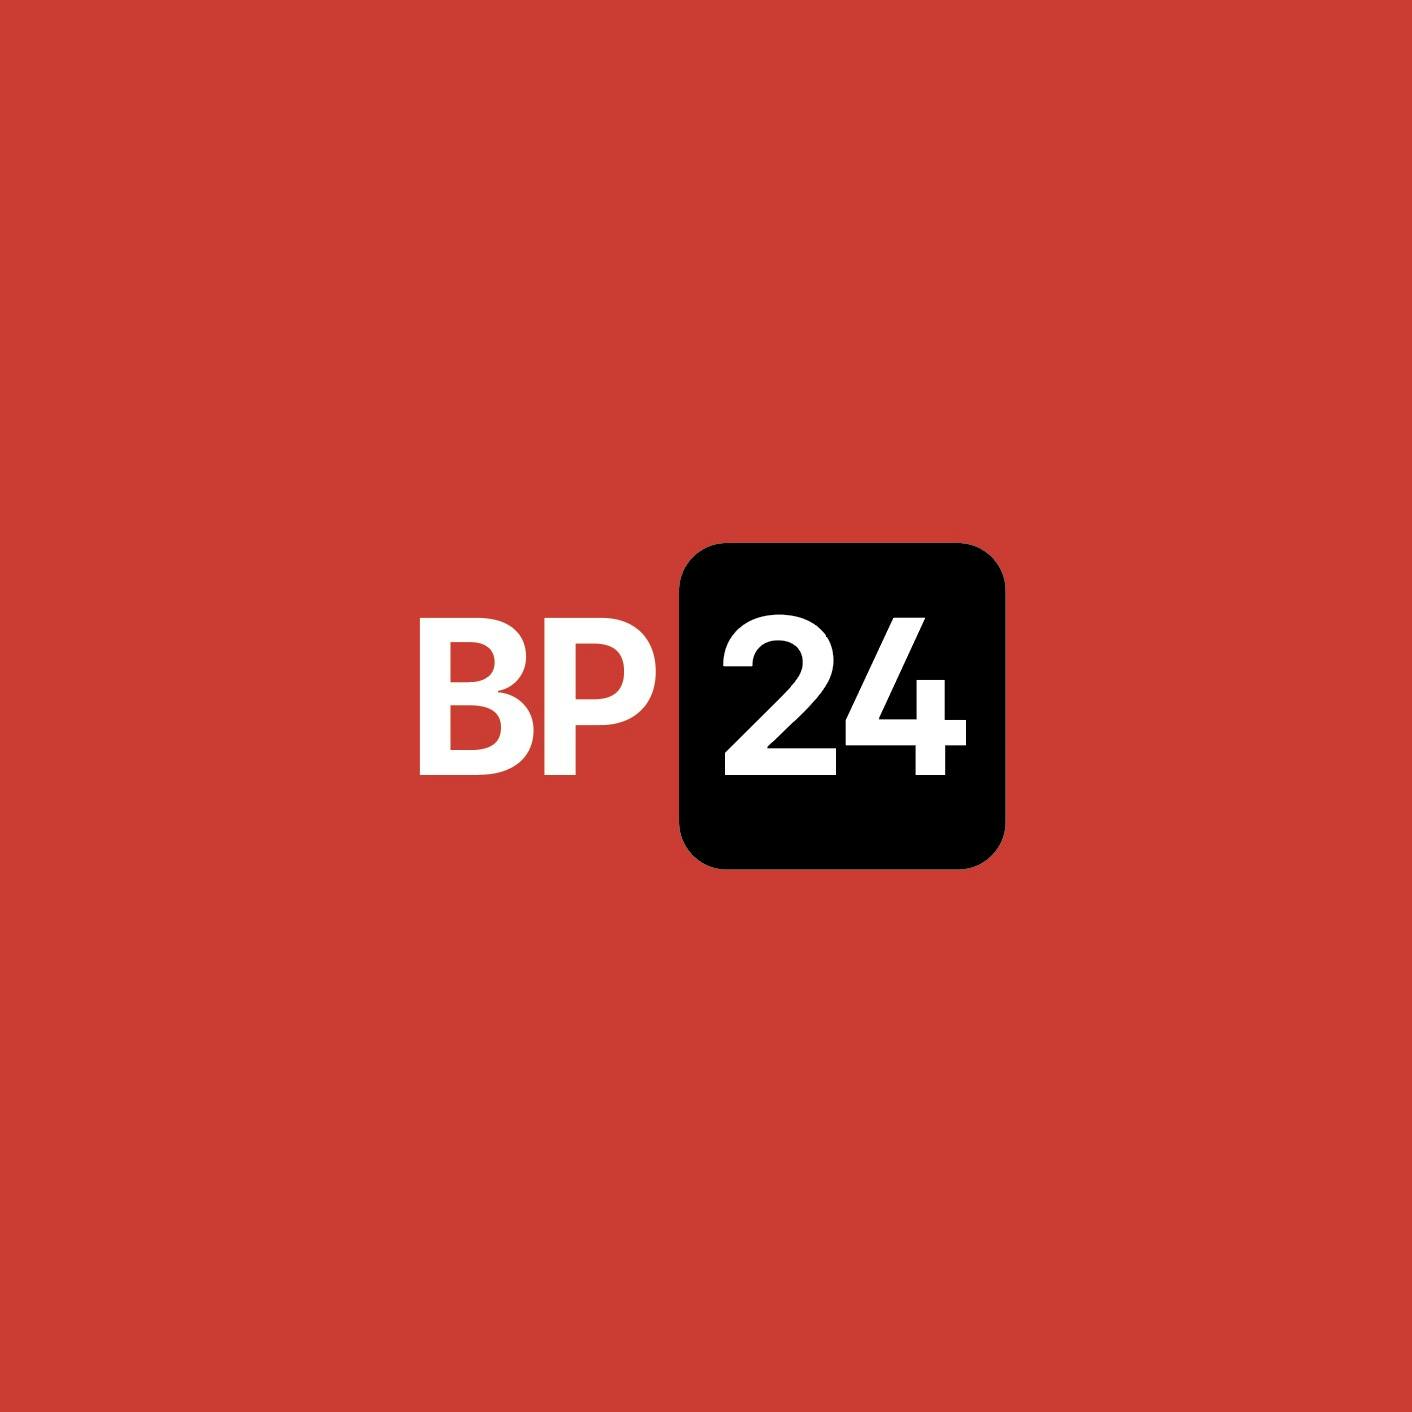 BP24 icon, black on red.